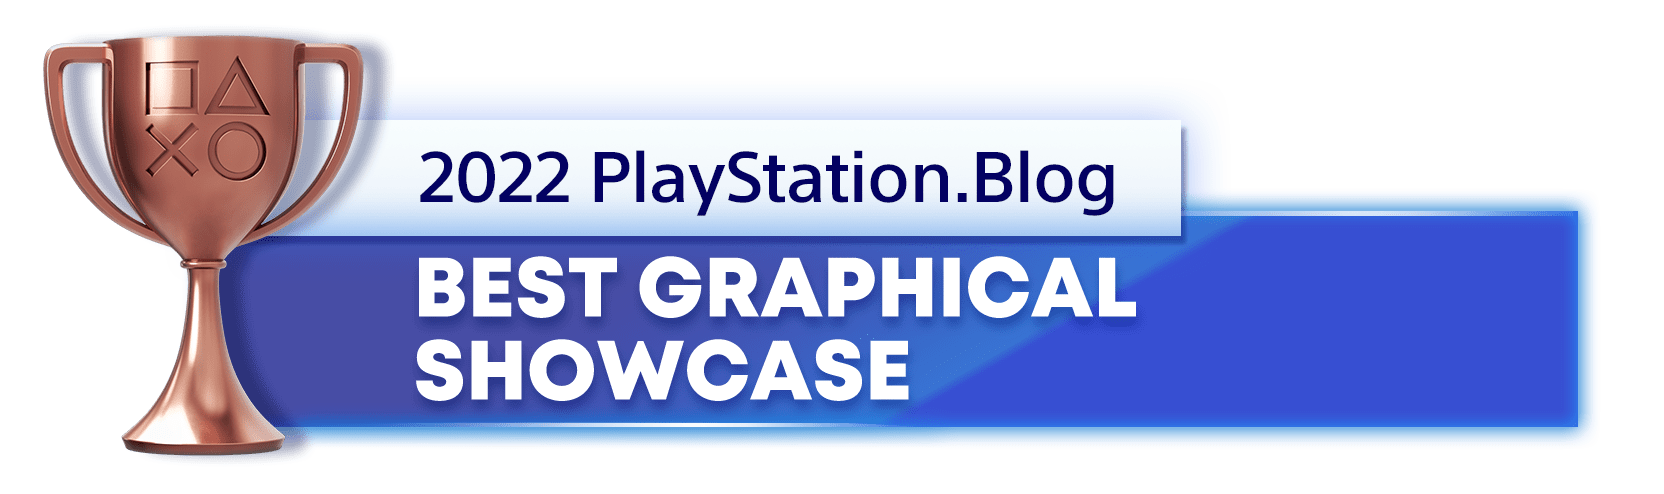 PlayStation Blog's 2022 Bronze trophy for best graphical showcase